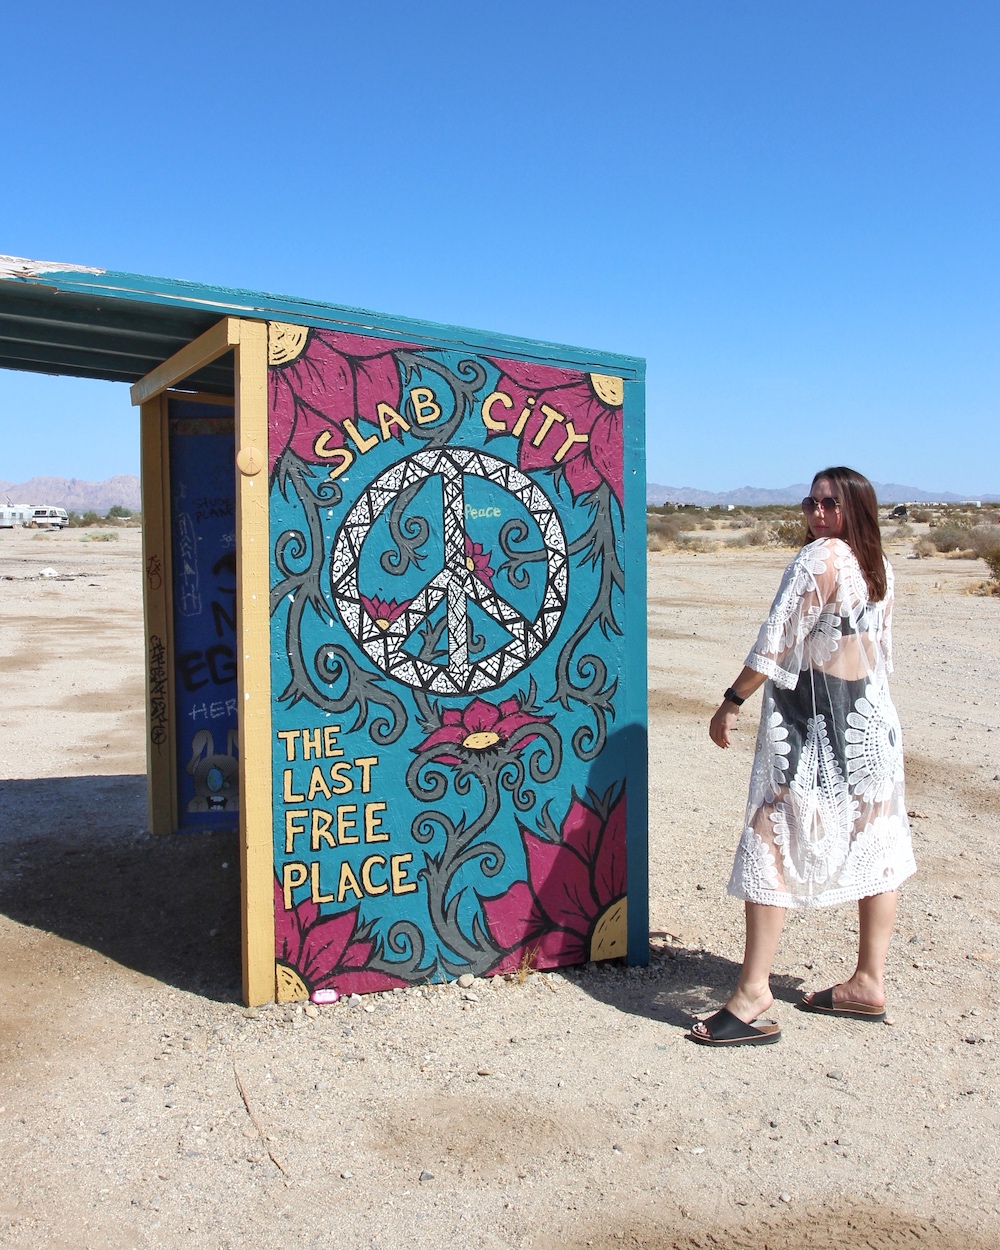 How To Spend 3 Days in Palm Springs - Slab City The Last Free Place